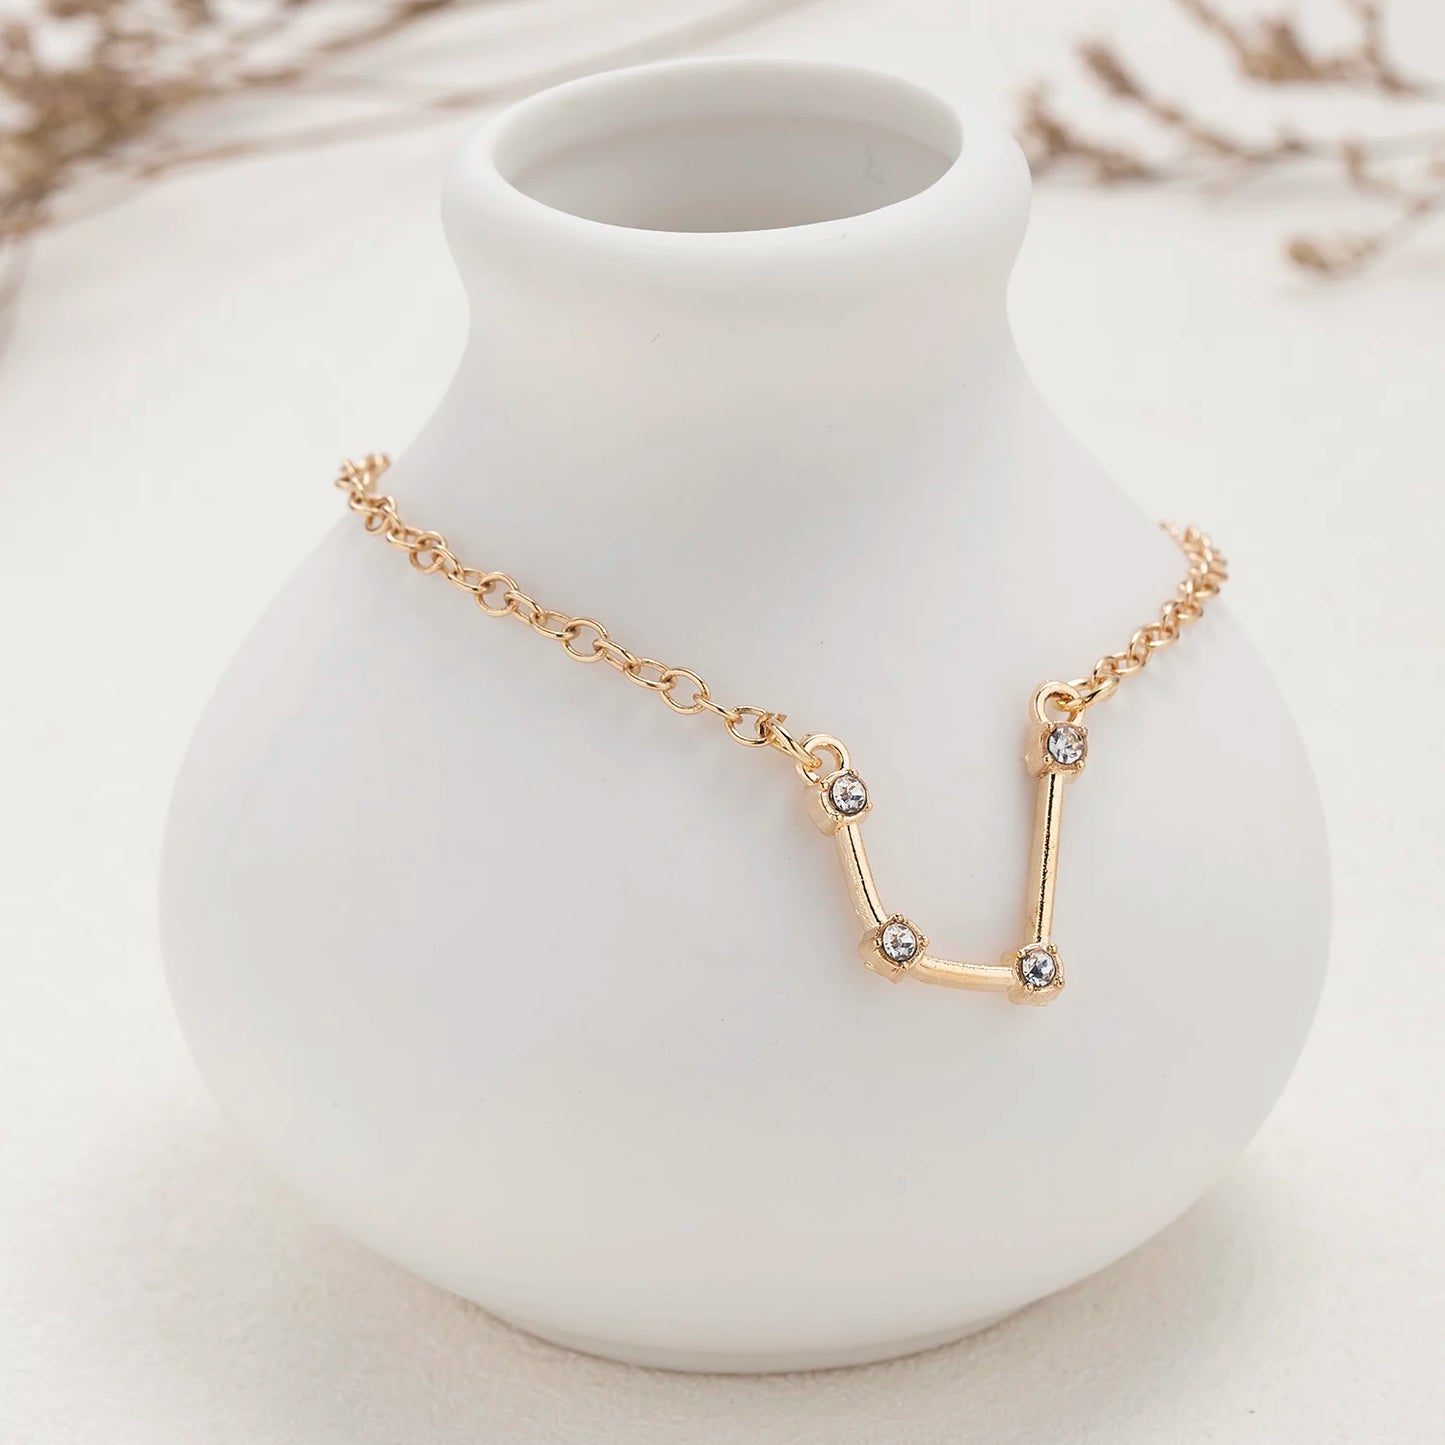 Cardboard Star Zodiac Sign 12 Constellation Bracelet Crystal Charm Gold Color Chain Bracelet for Women Birthday Jewelry Gifts